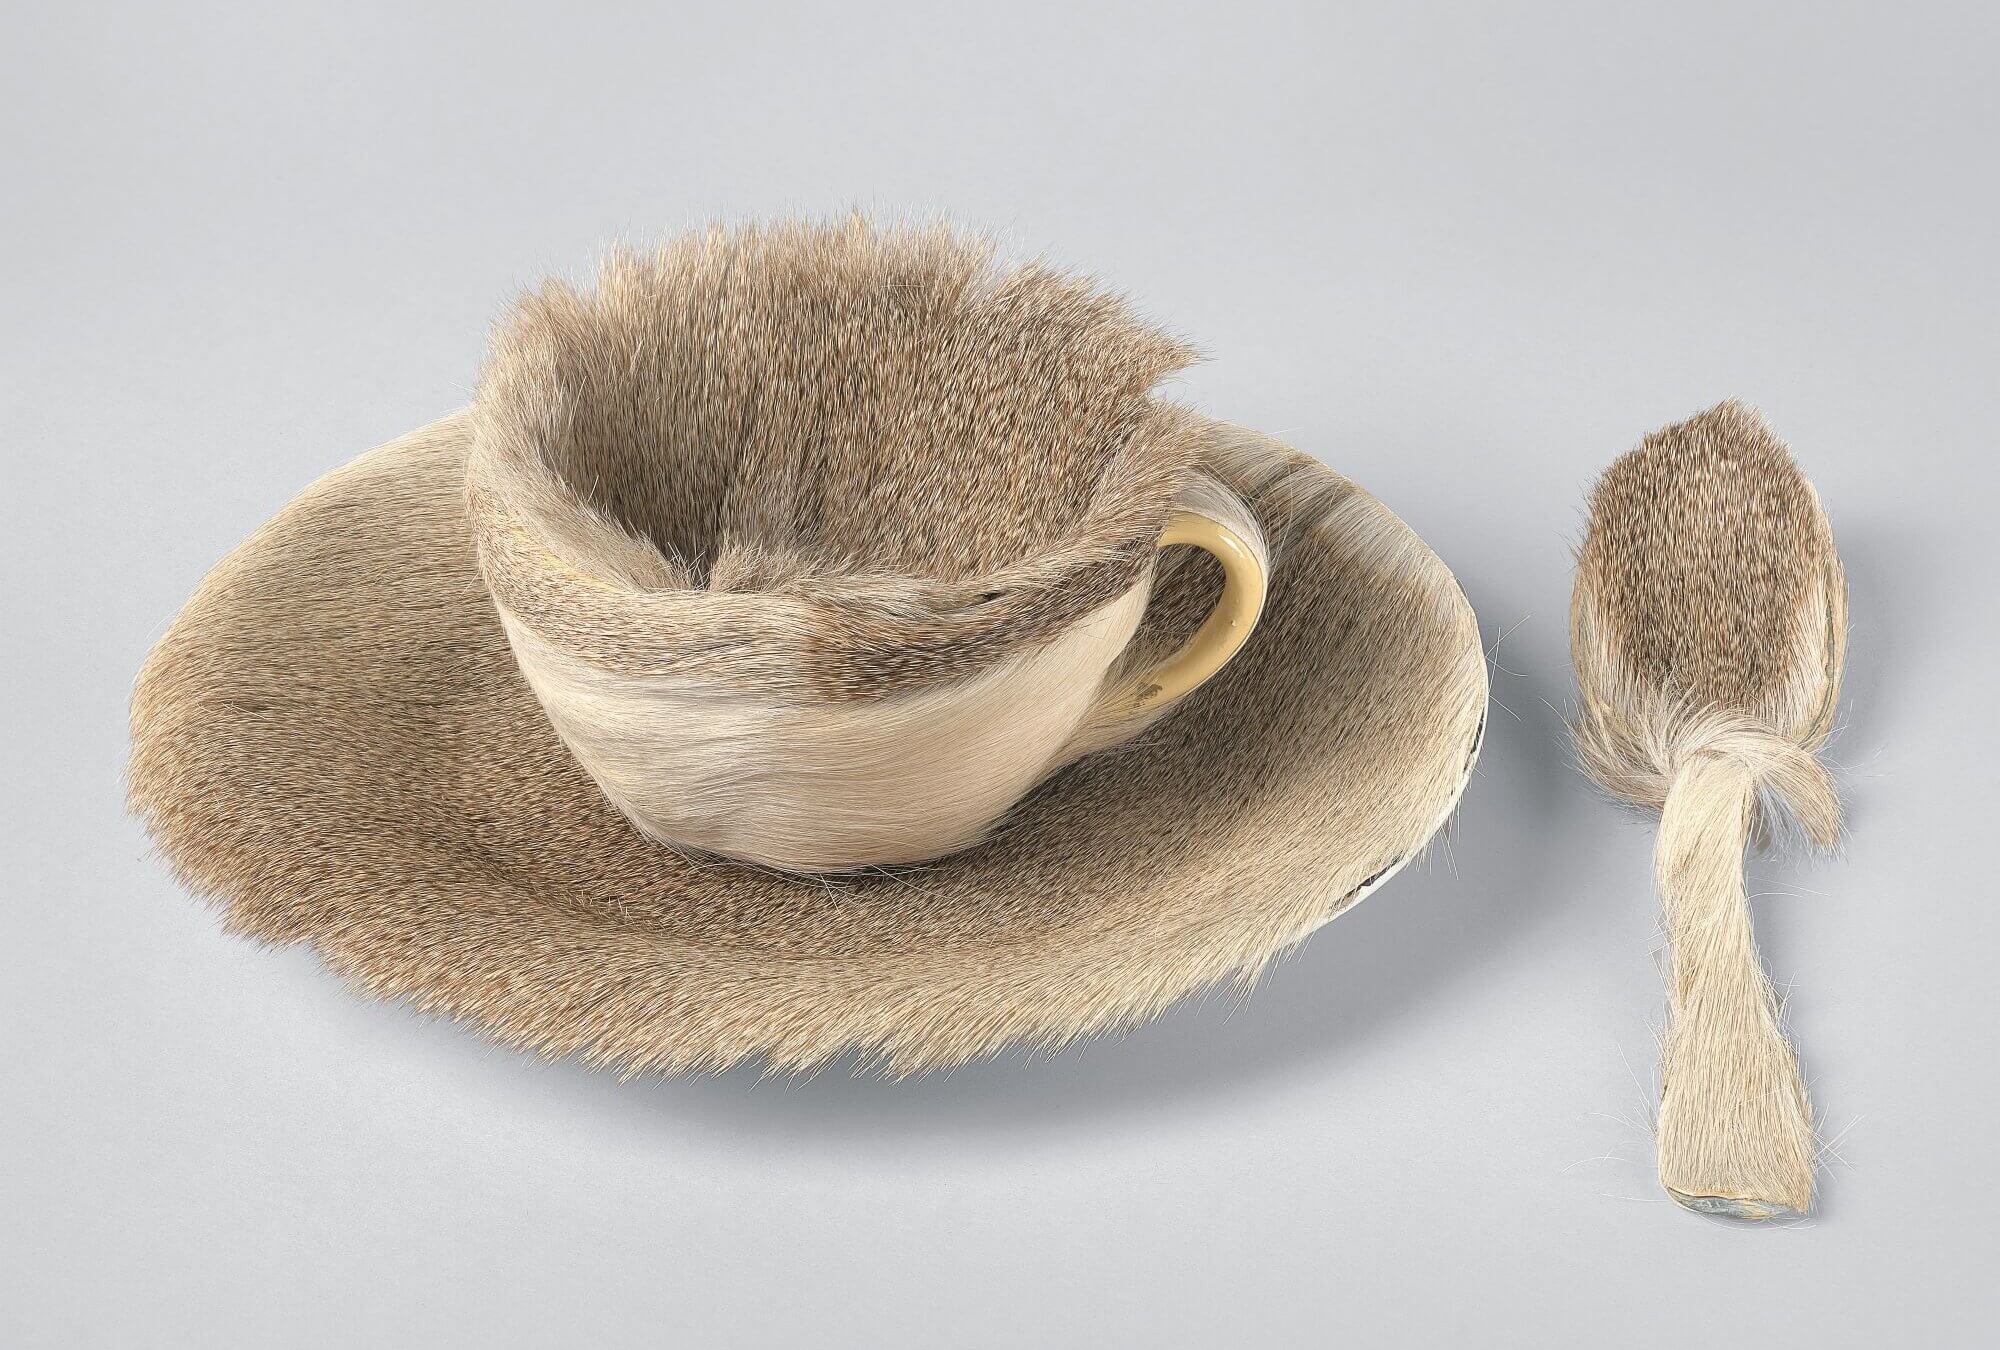 The fur-lined teacup shot Oppenheim to fame; people found it sexual, absurdist and confounding. It became the first piece by a woman artist in MoMA's collections, where it is regularly on display.